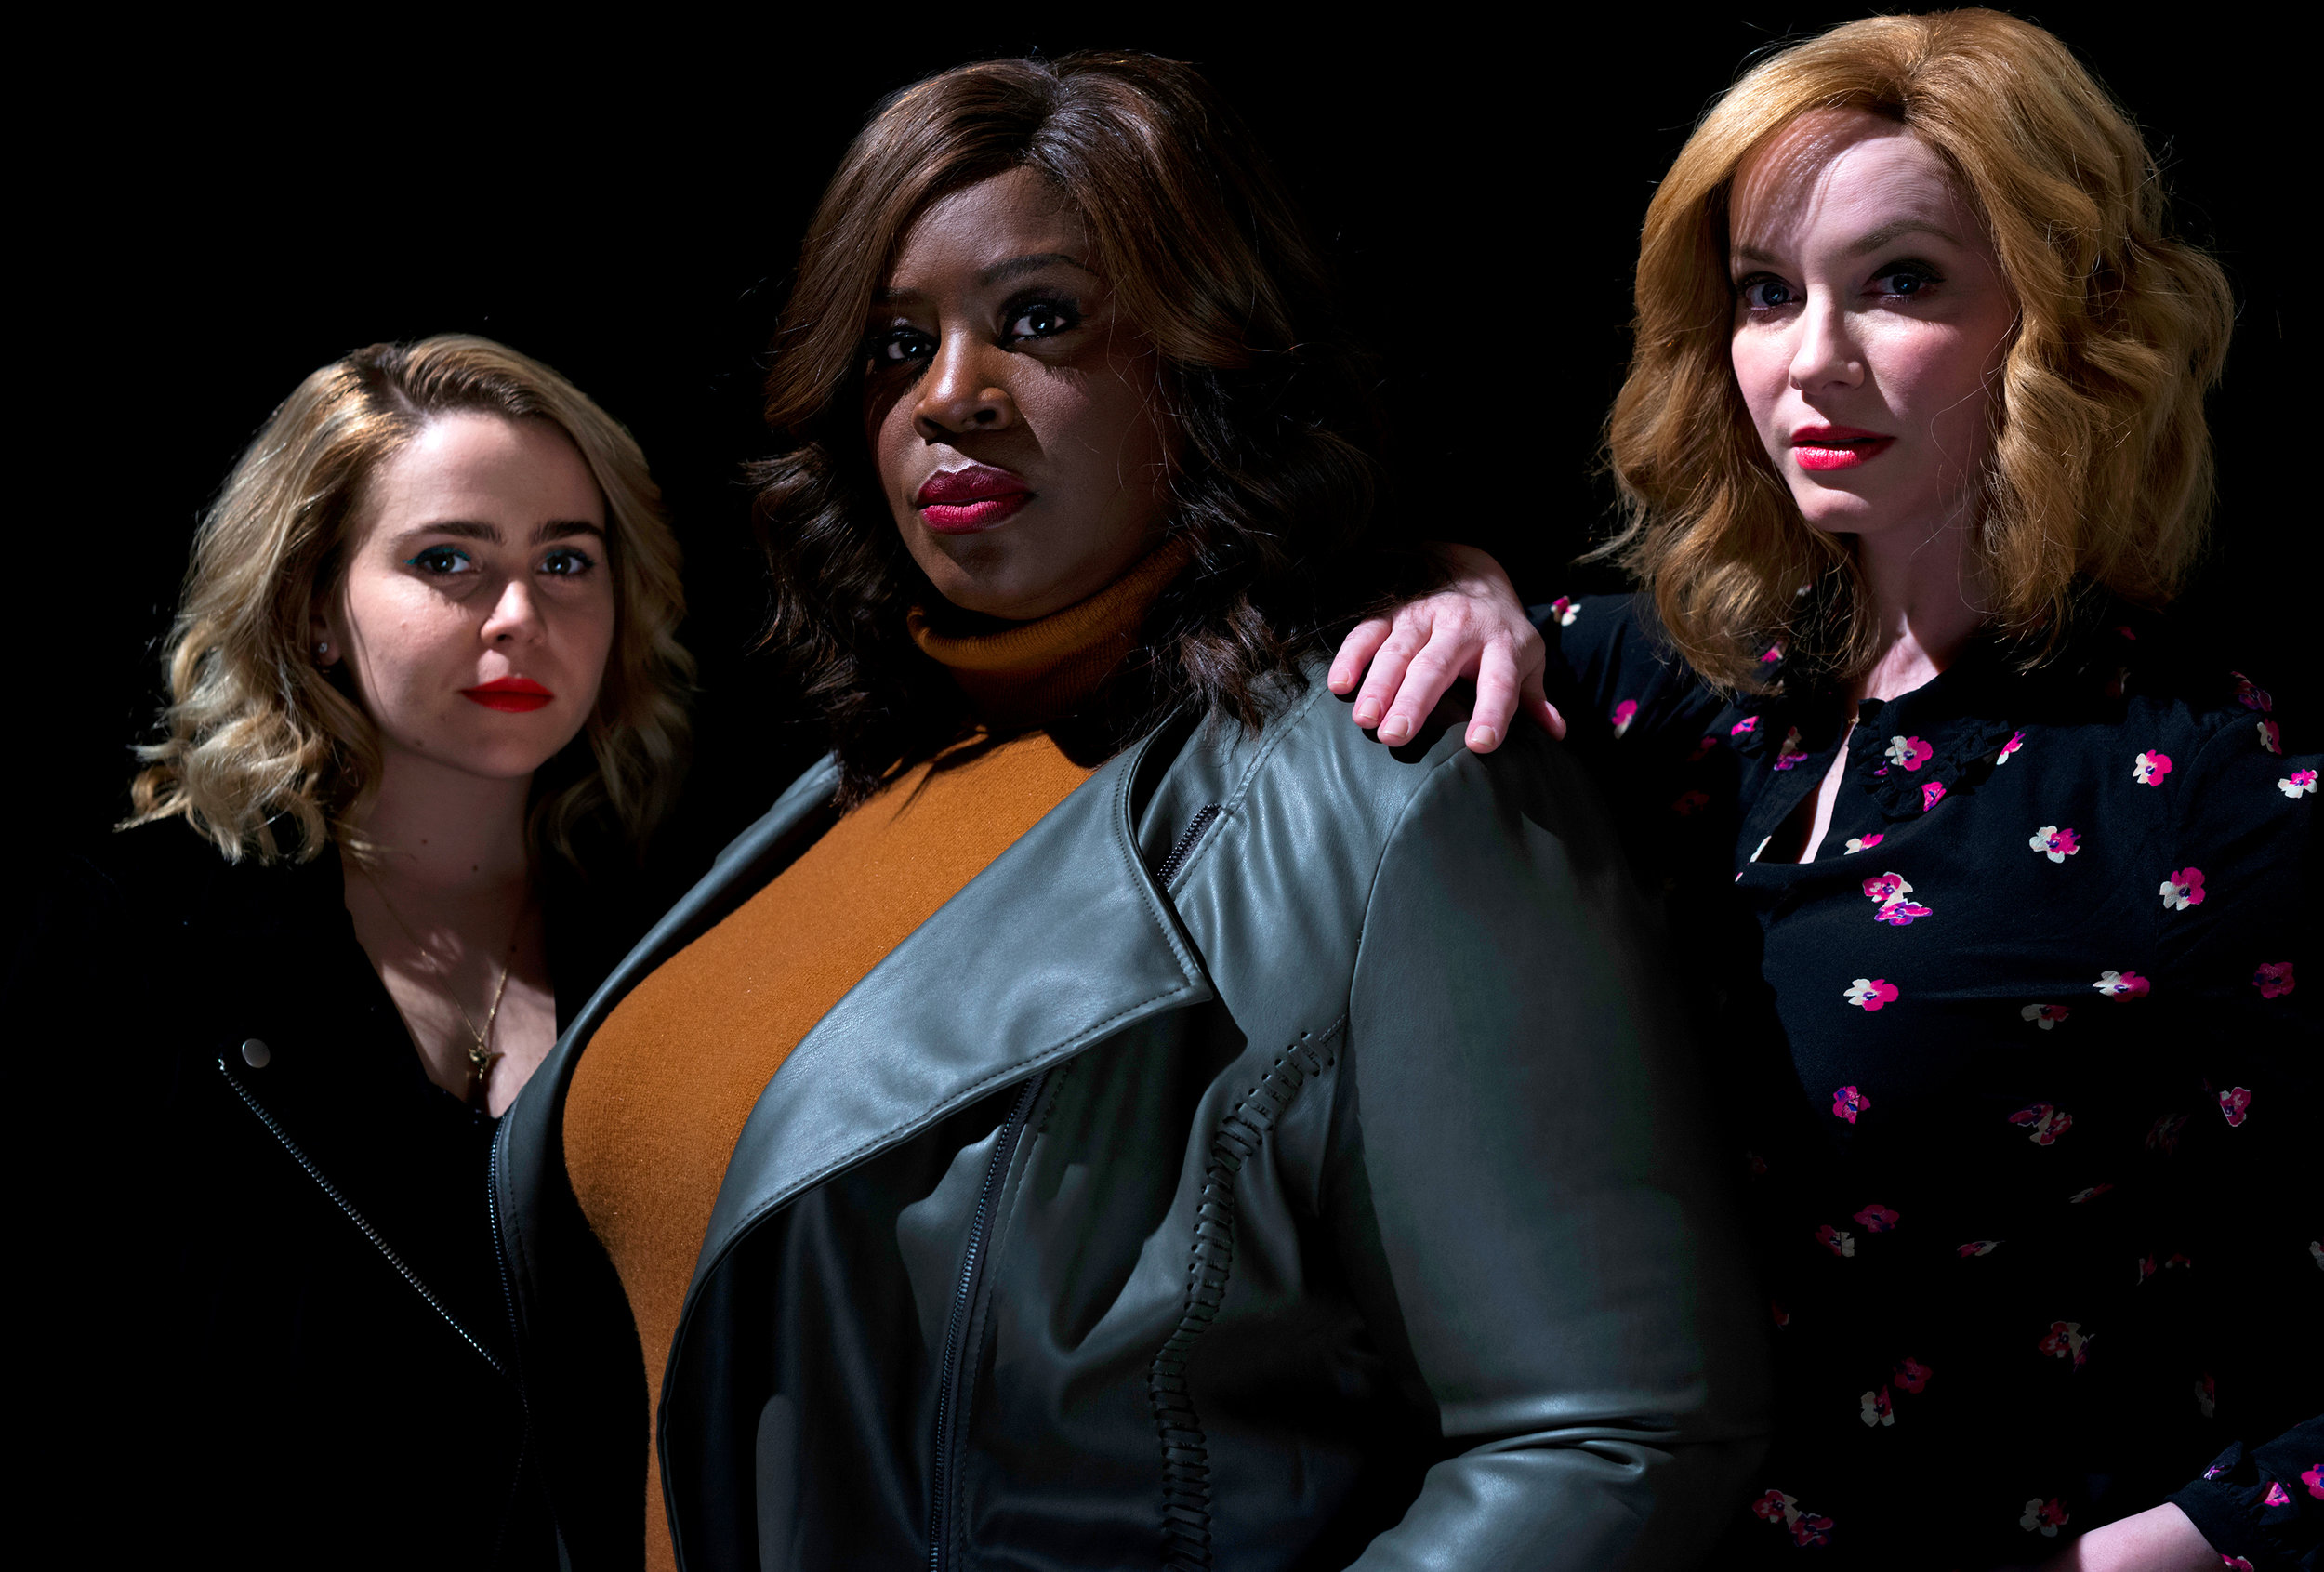  The cast of Good Girls for  The New York Times  